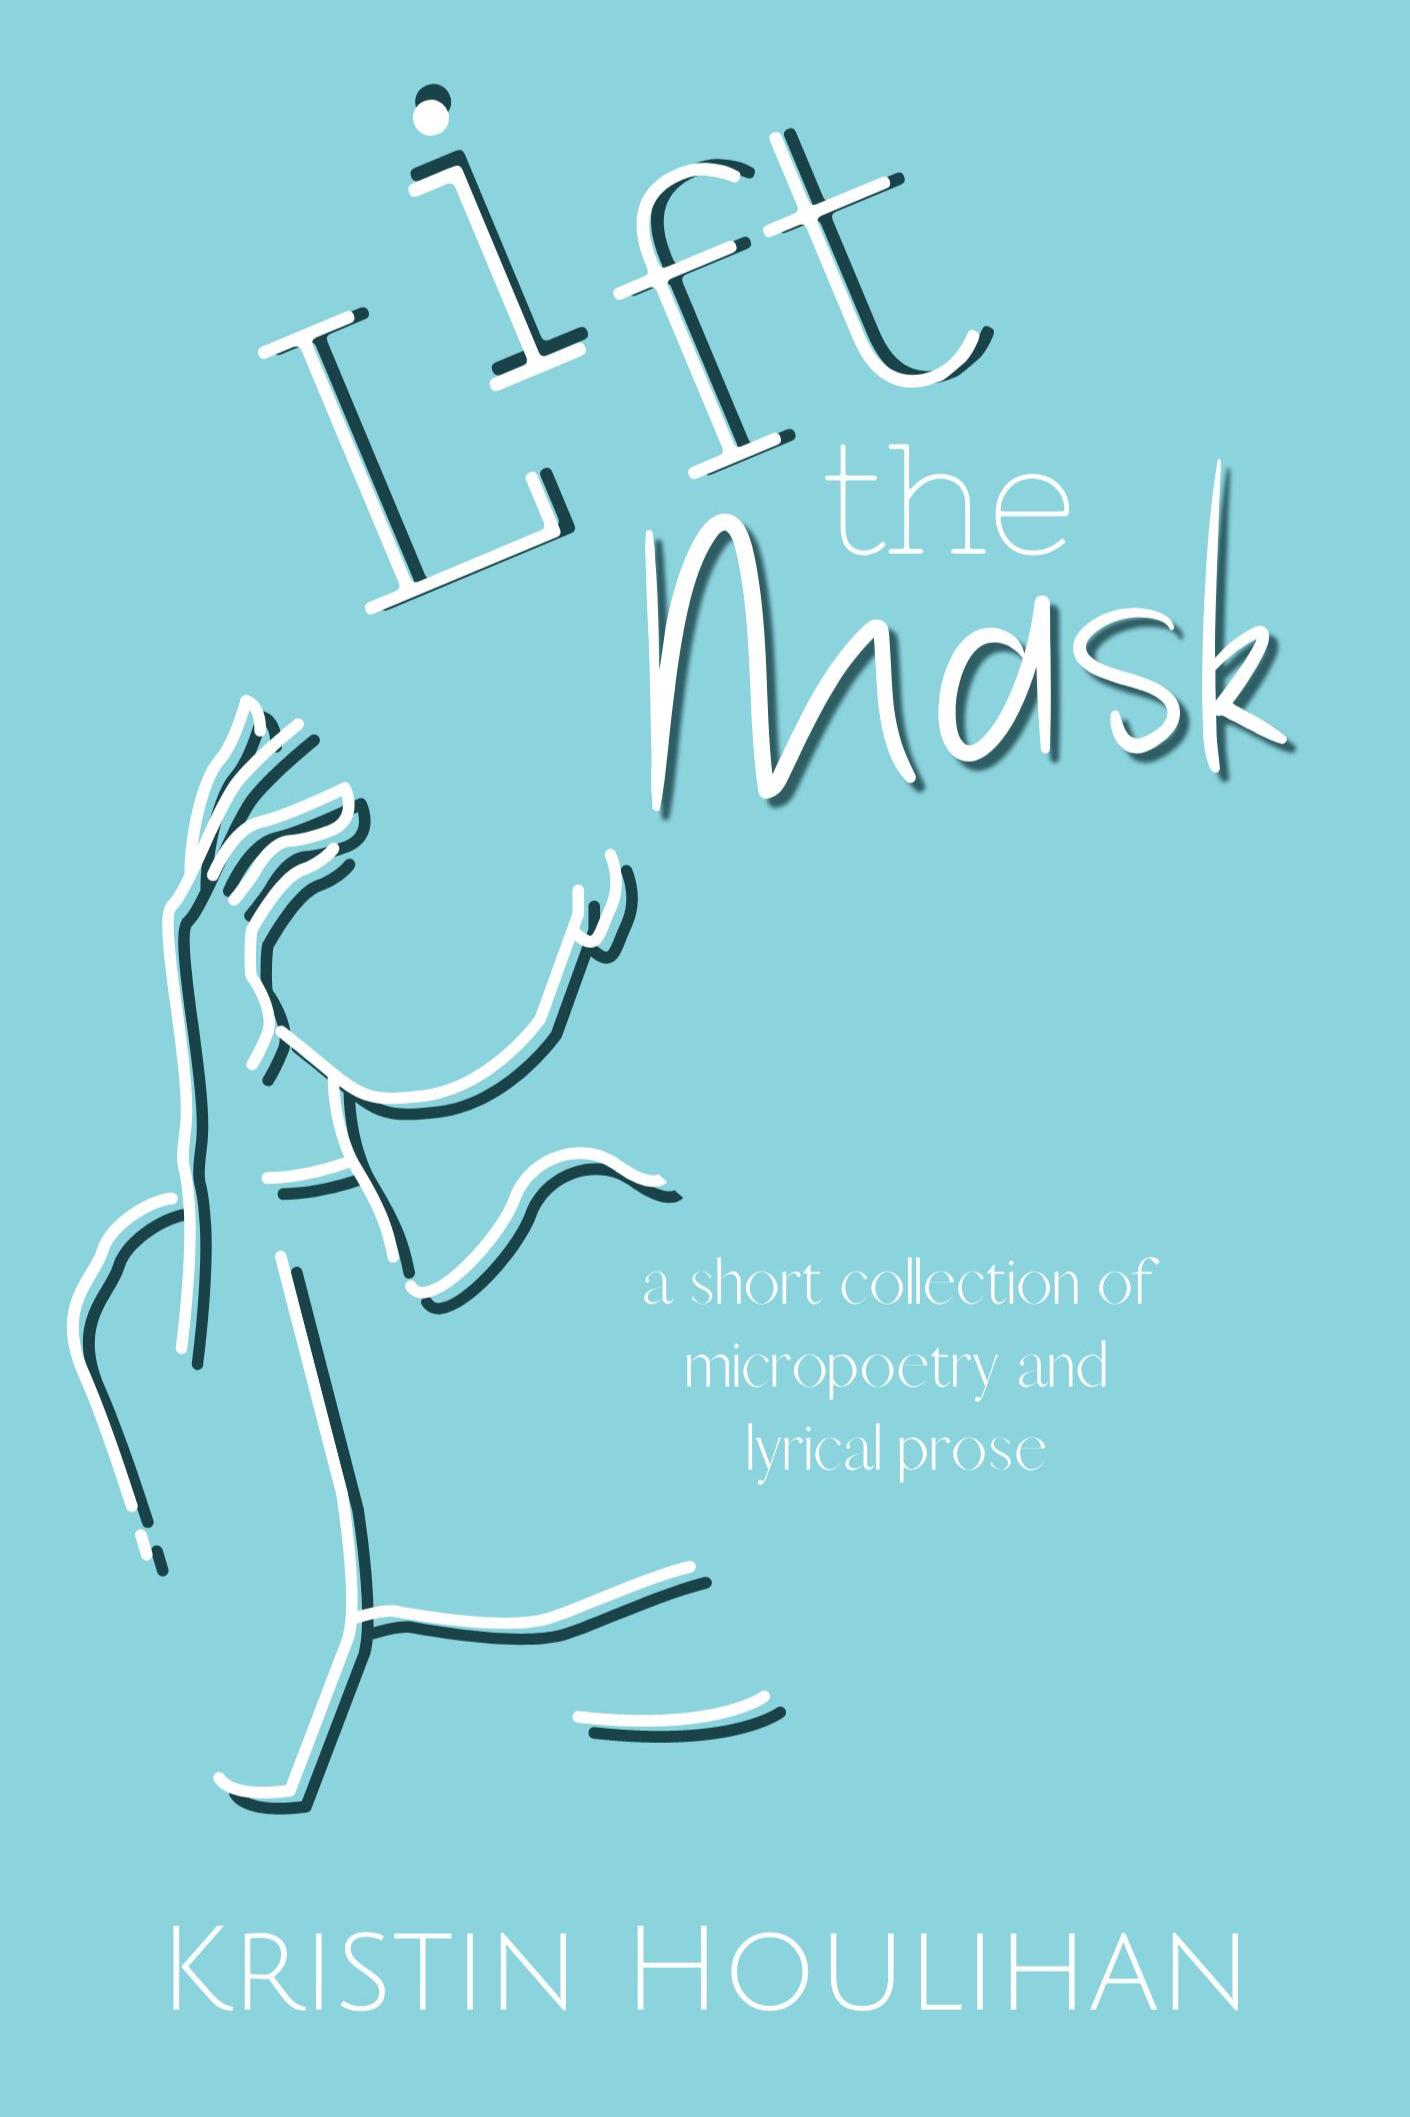 Book cover of Lift the Mask by Kristin Houlihan